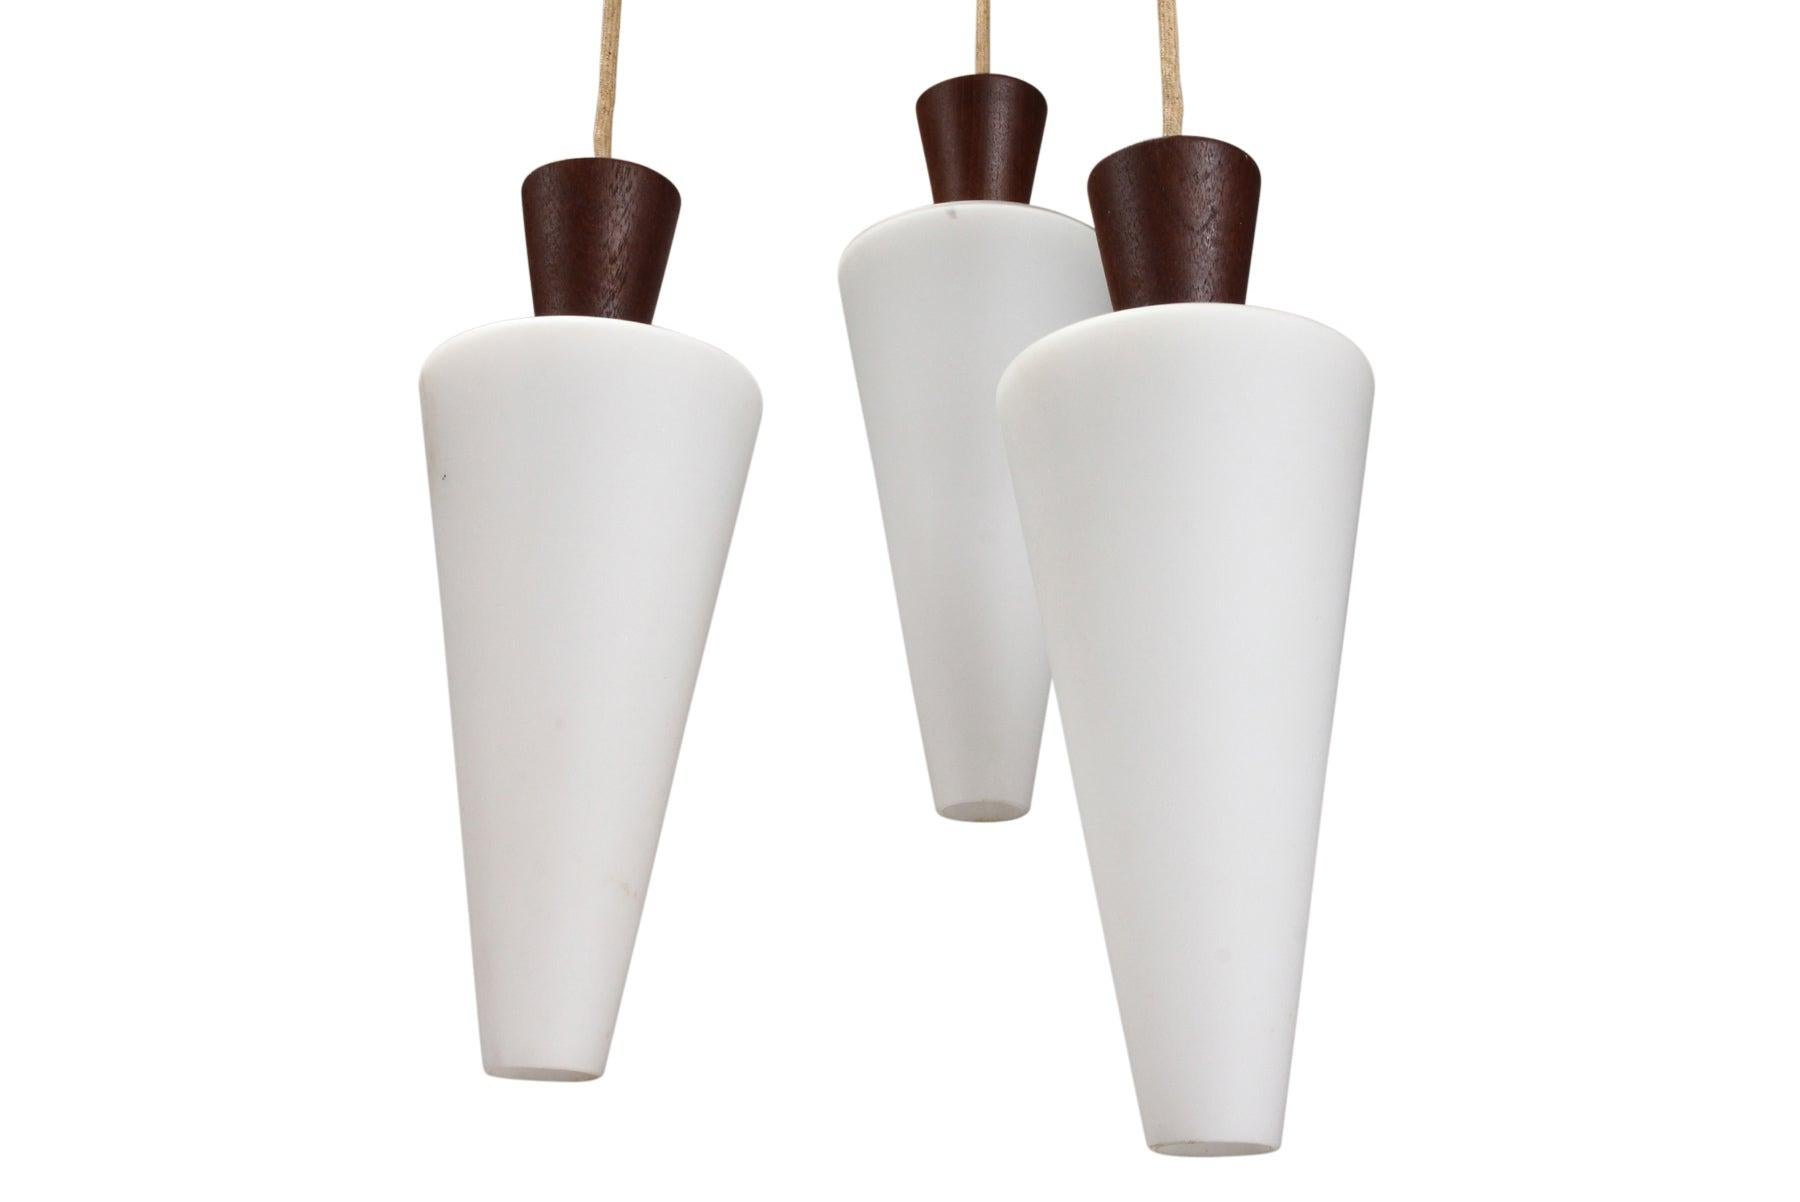 20th Century Atomic Tri-Pendant Lamp In Teak With Frosted Glass Cones For Sale